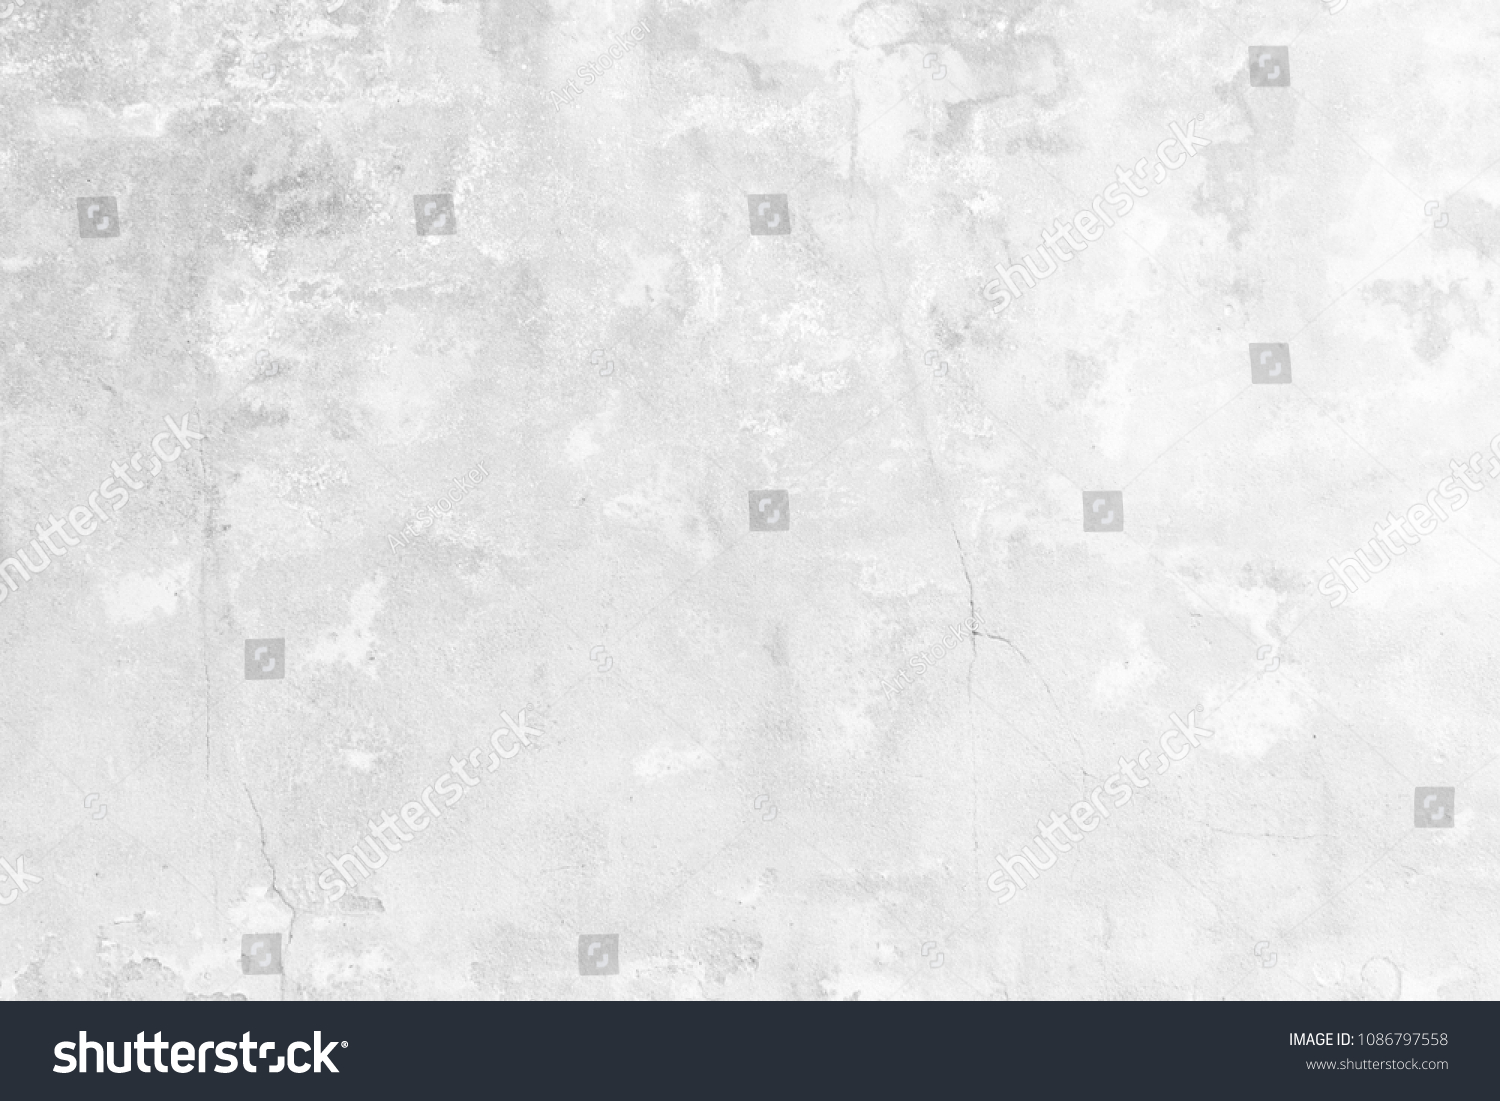 Urban gray concrete stone texture background in white light top table design paper Back grunge rock modern bacground concept seamless scratch plaster geometric stucco desk, marble wallpaper wide #1086797558